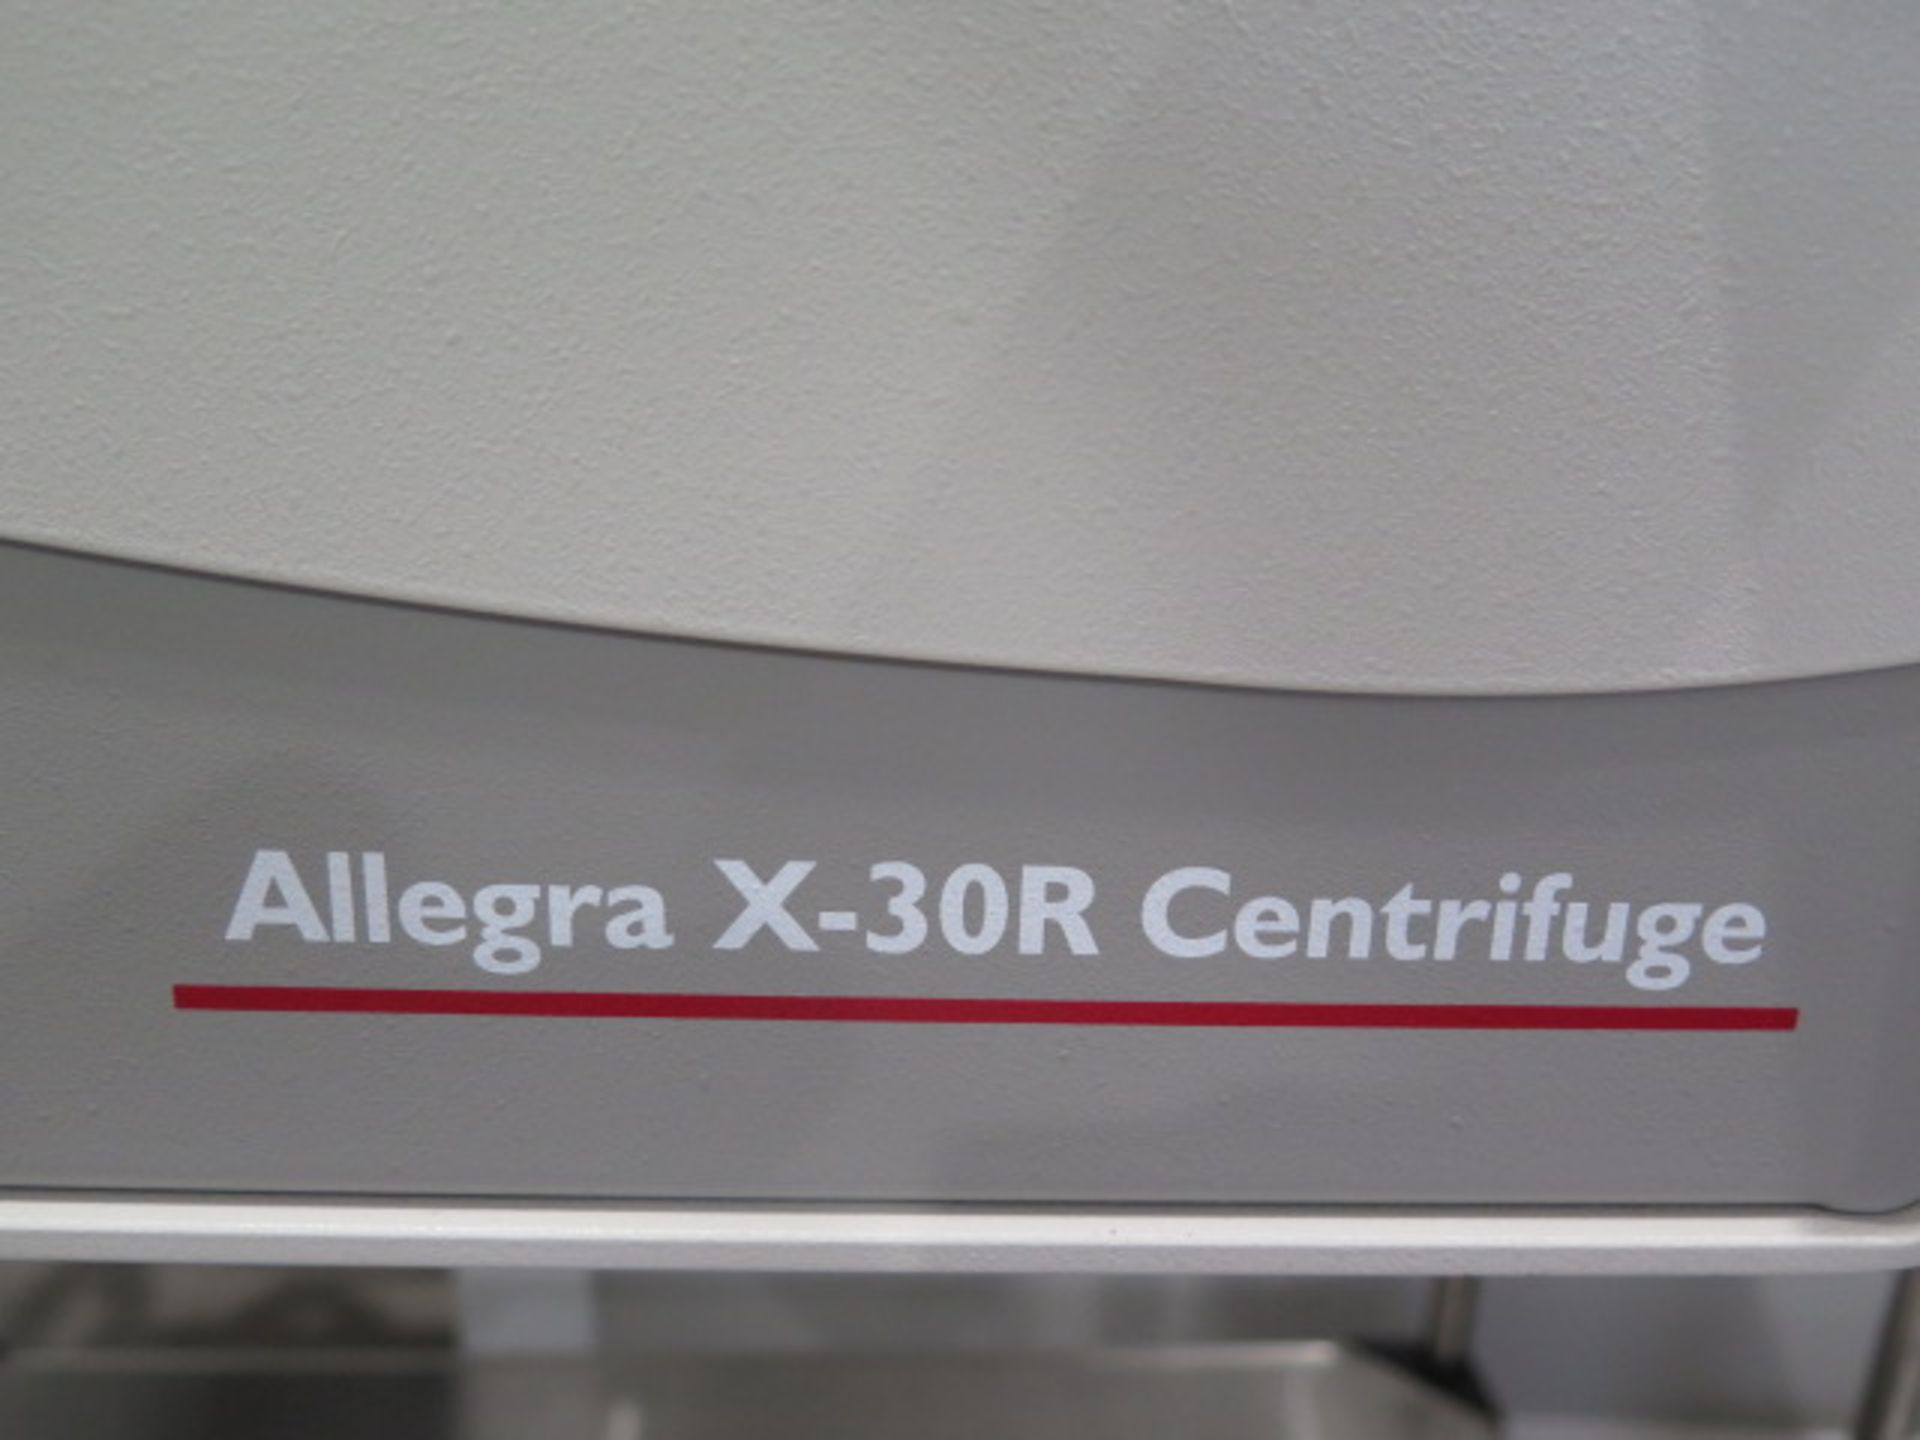 Beckman Coulter Allegra X-30R Centrifuge s/n ALZ19A083 (SOLD AS-IS - NO WARRANTY) - Image 10 of 11